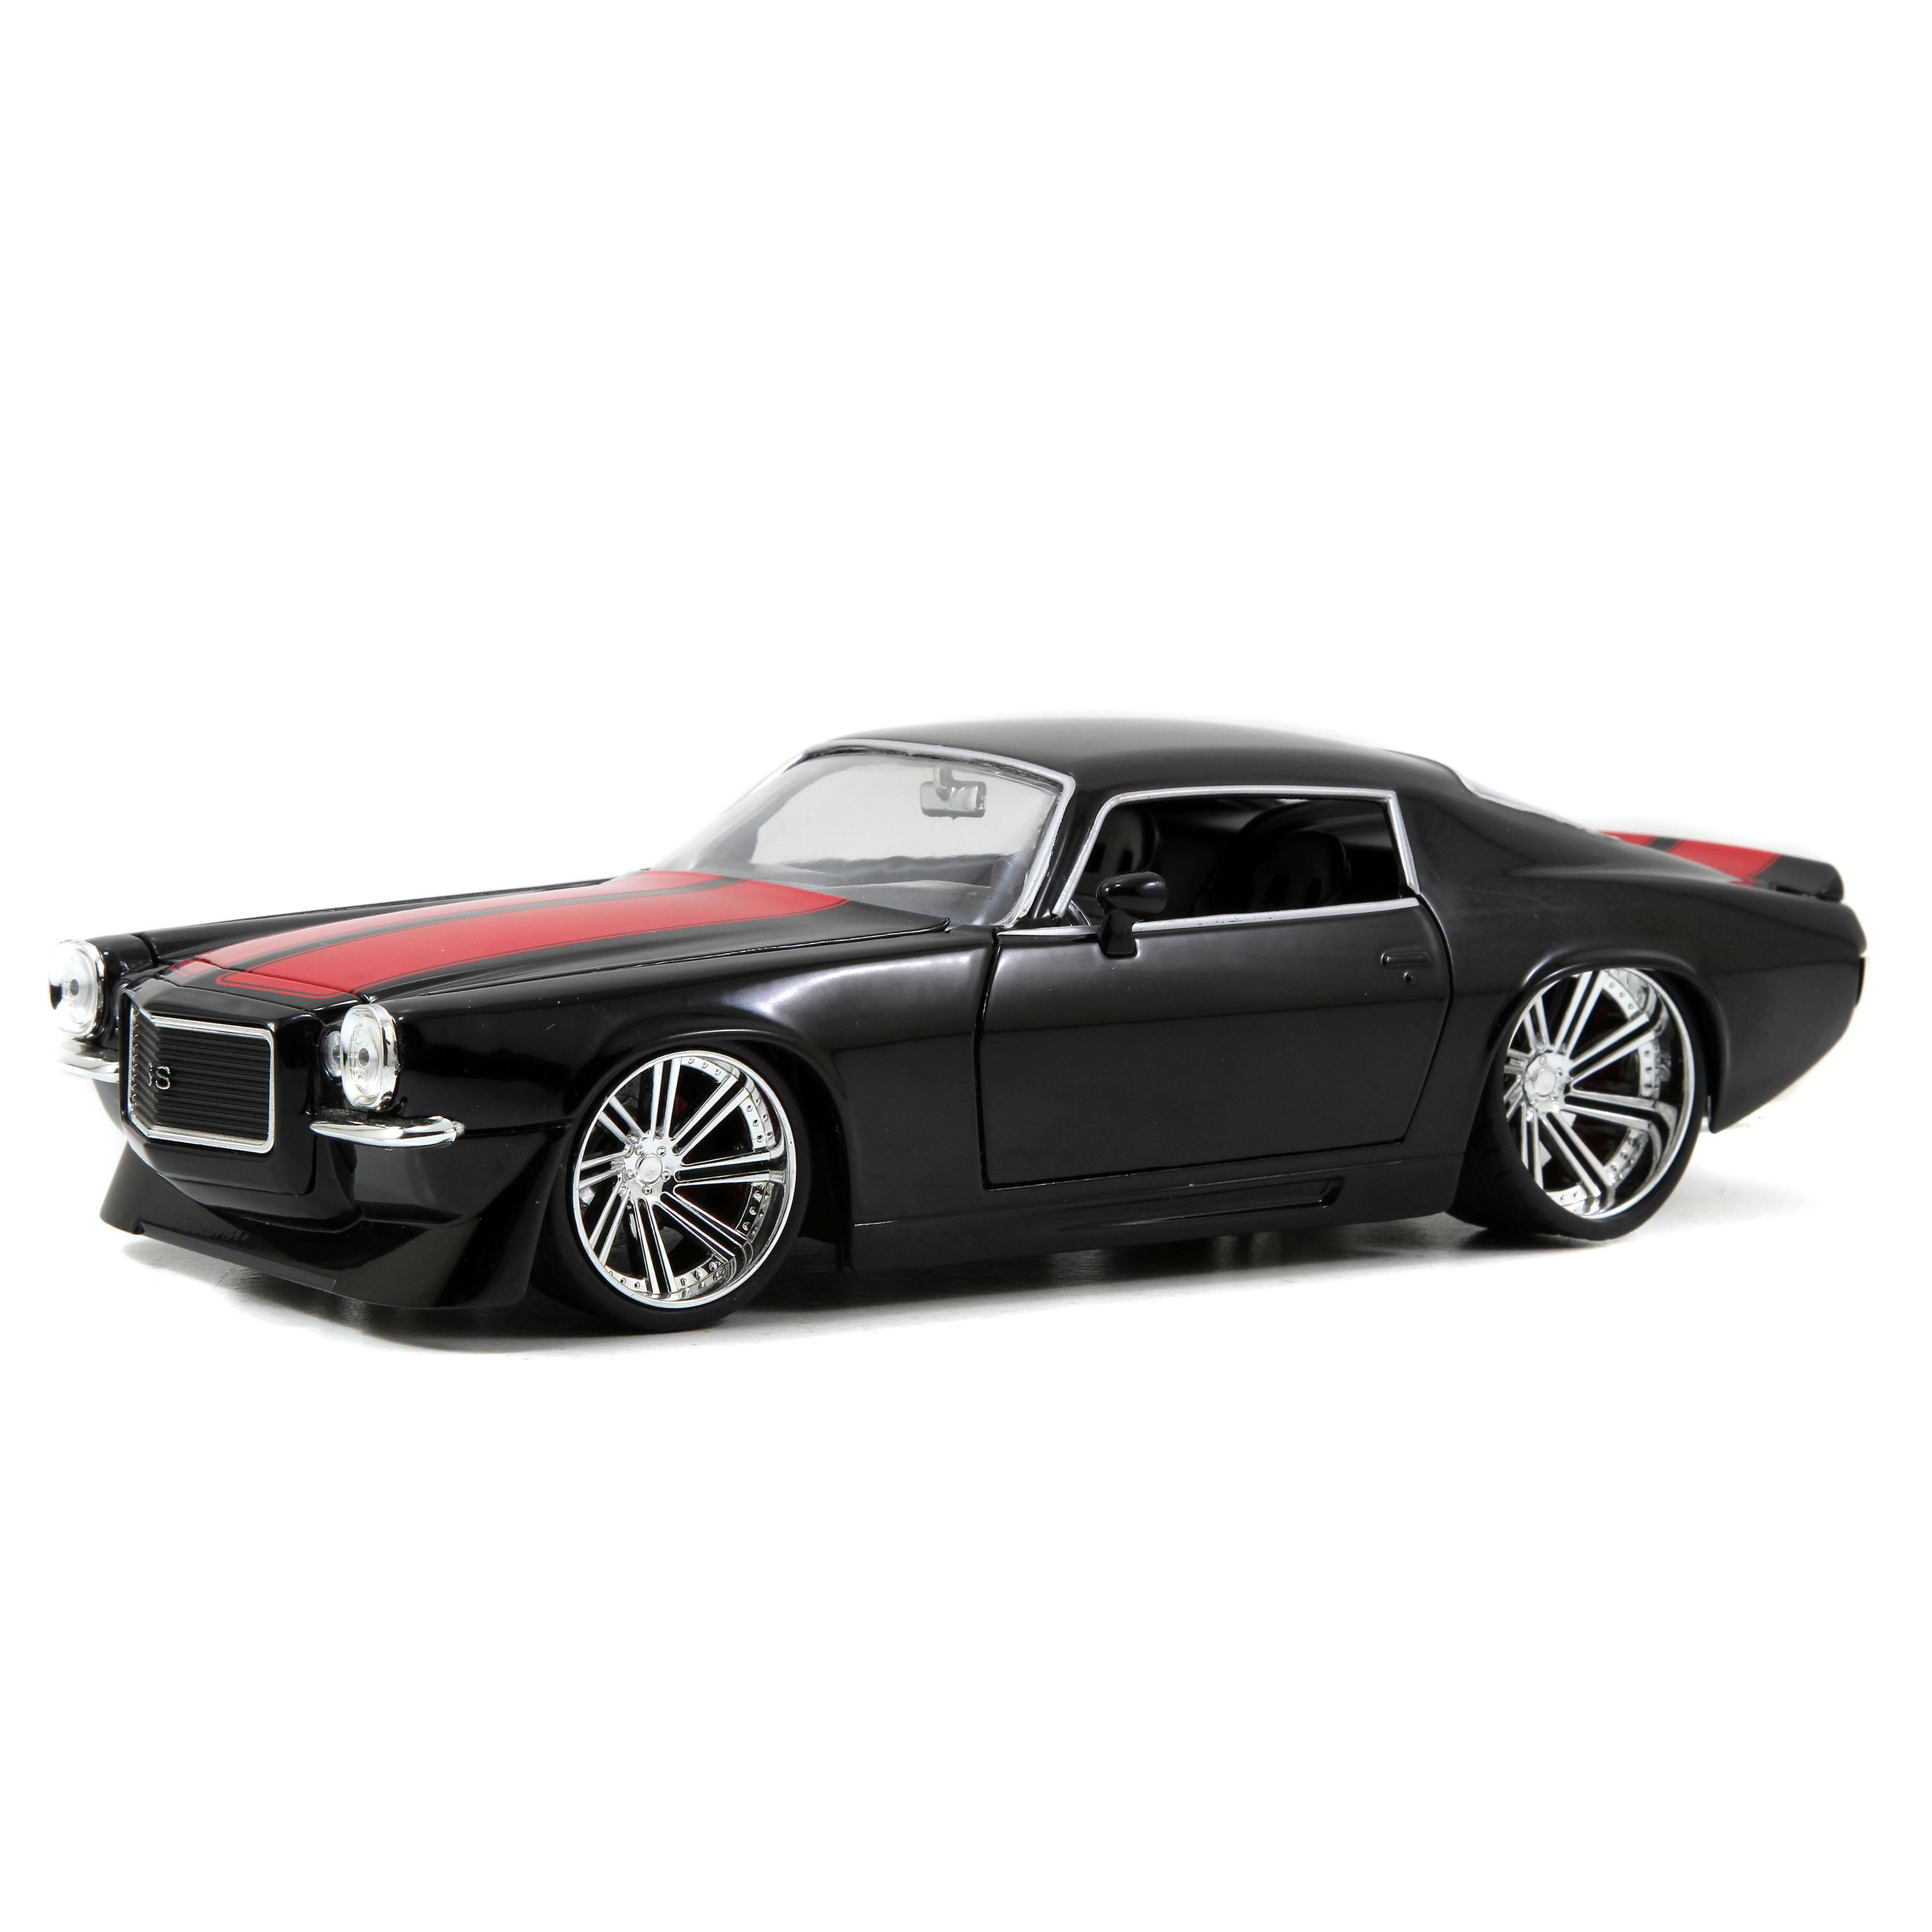 Big Time Muscle 1:24 Diecast W138 1971 Chevy Camaro G., Black with Red